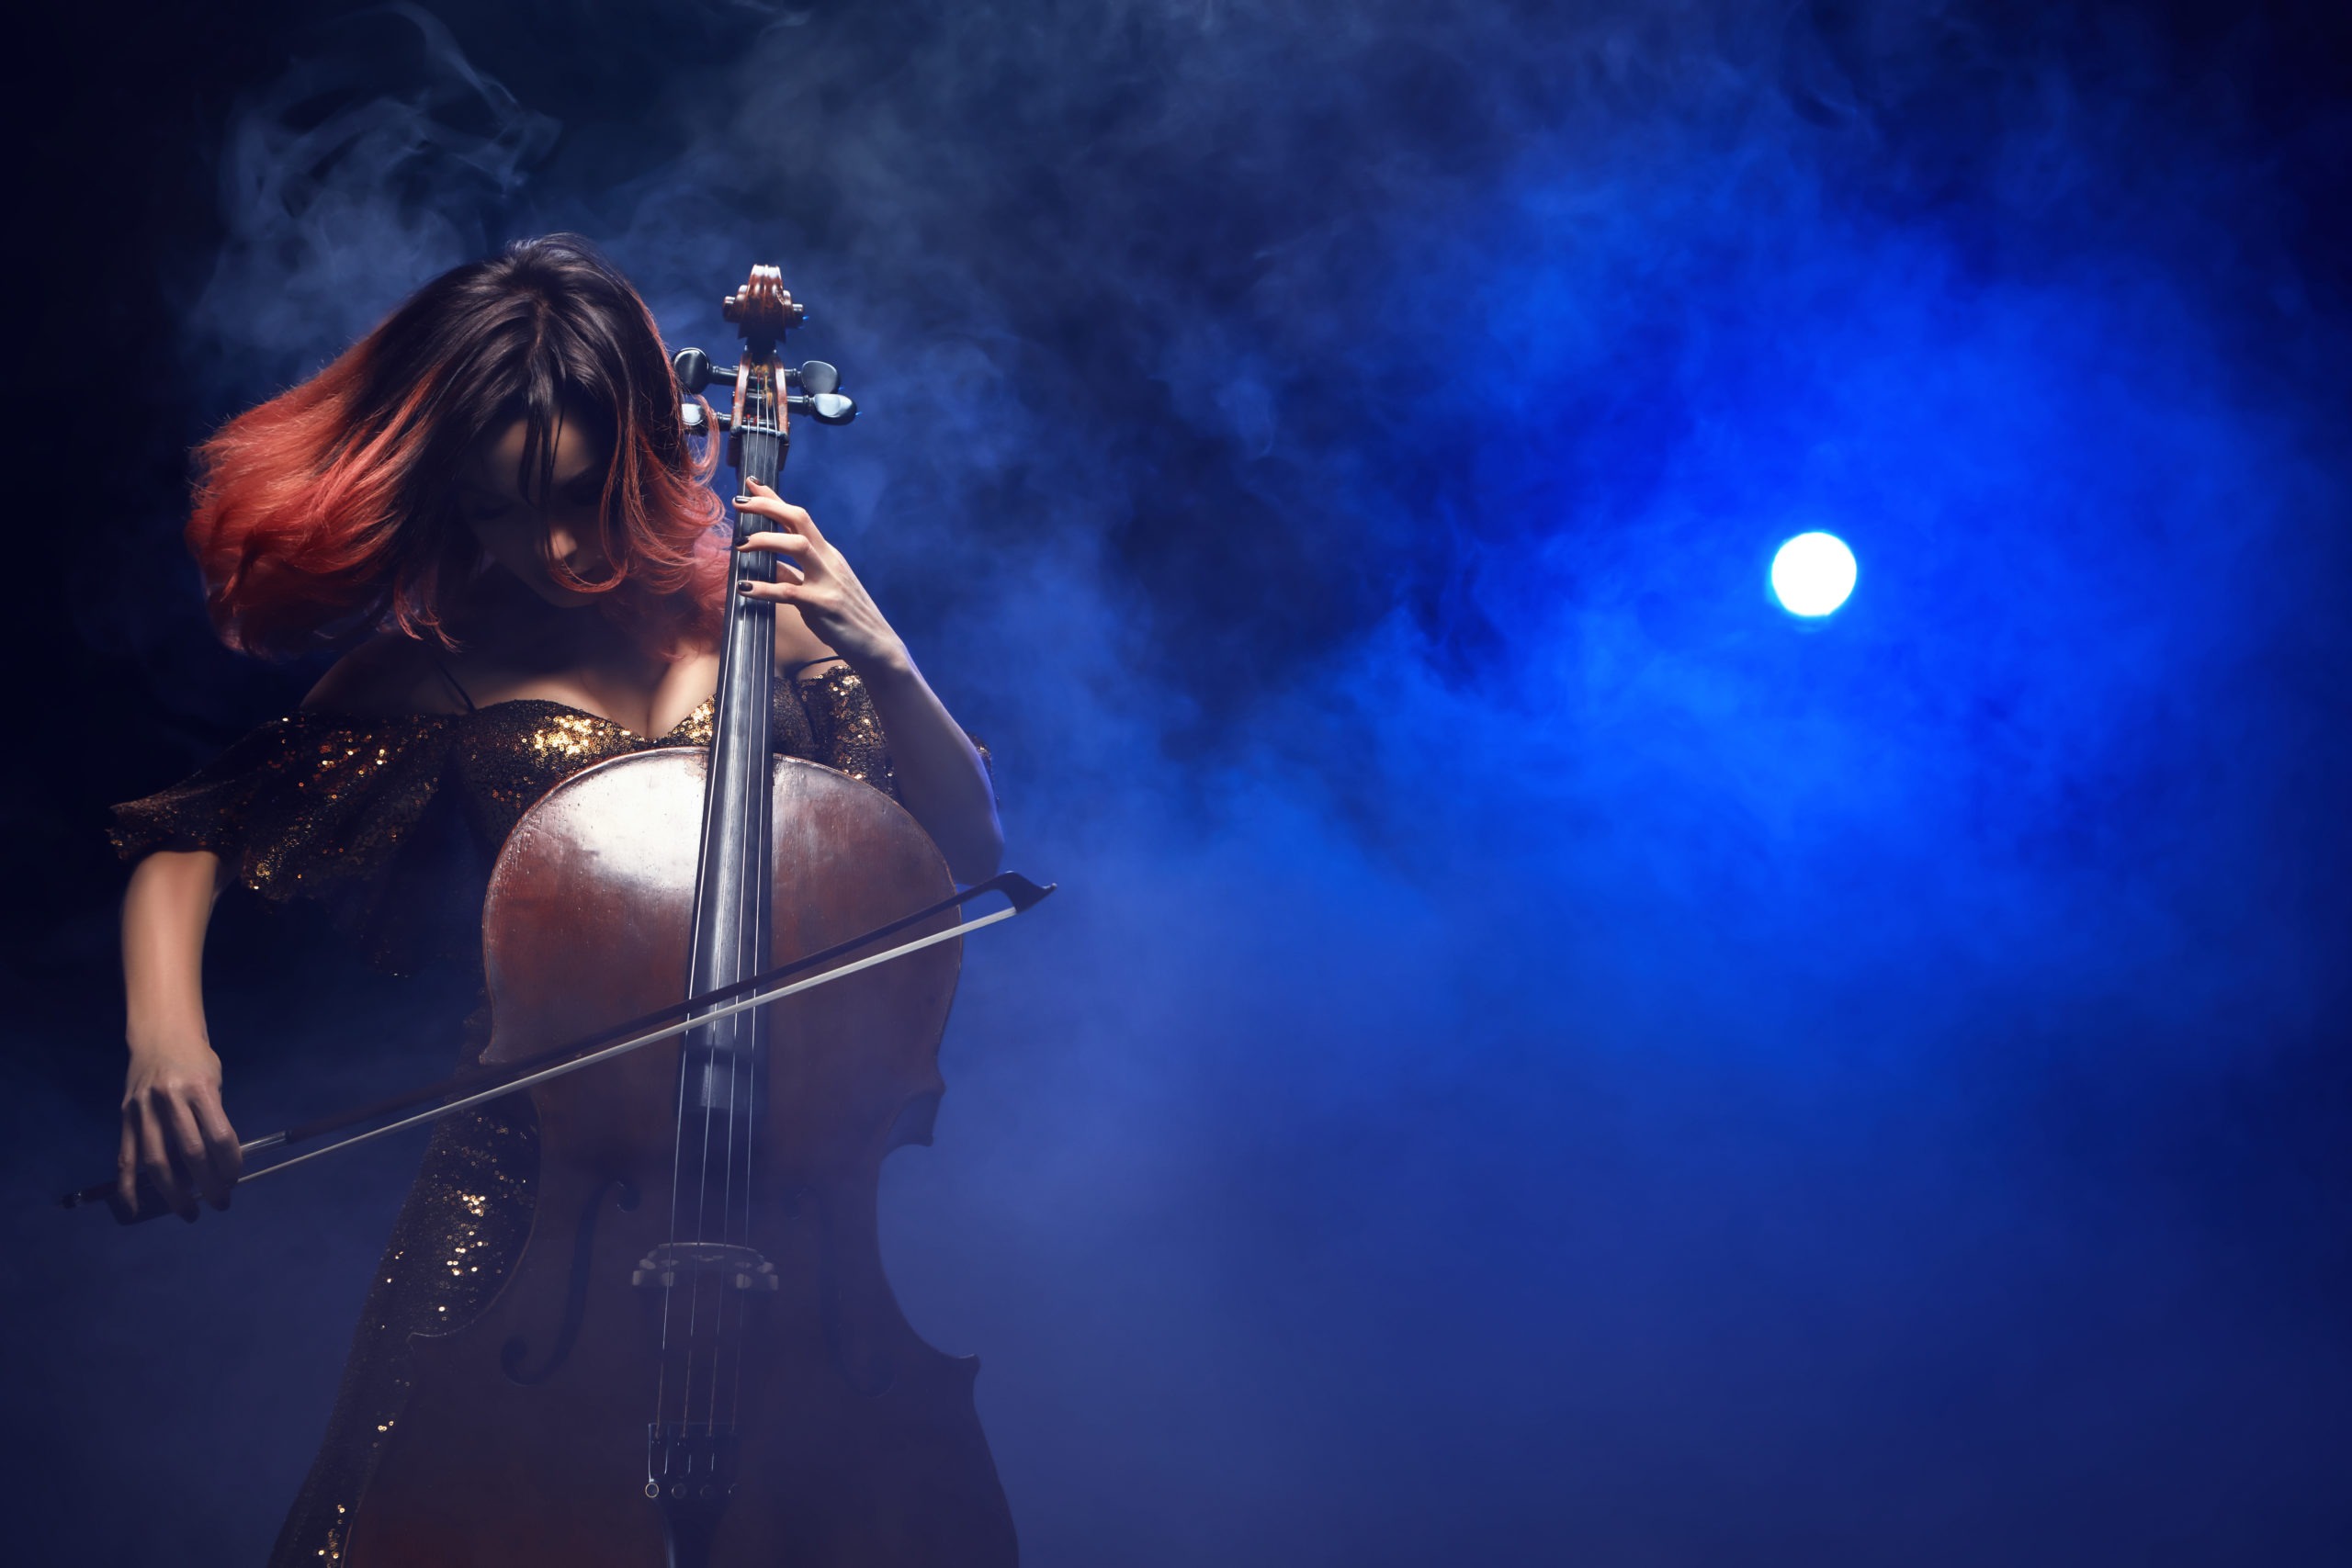 Female cellist performs on stage.